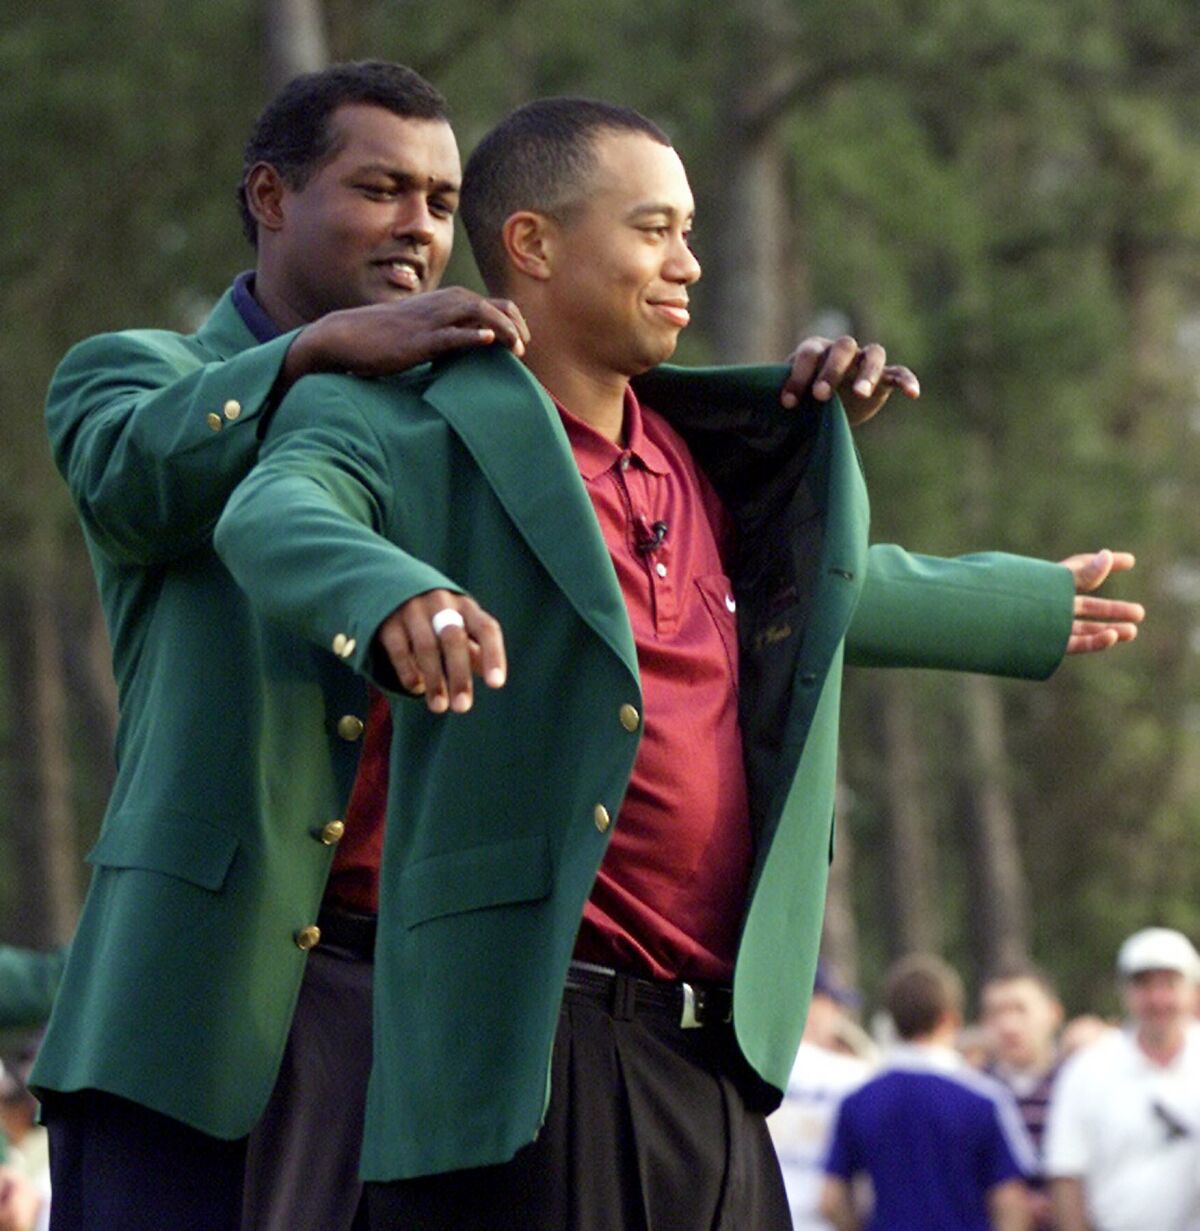 Tiger Woods, right, receives his Masters green jacket from 2000 champion Vijay Singh after winning the 2001 Masters at the Augusta National Golf Club in Augusta, Ga. on April 8, 2001.